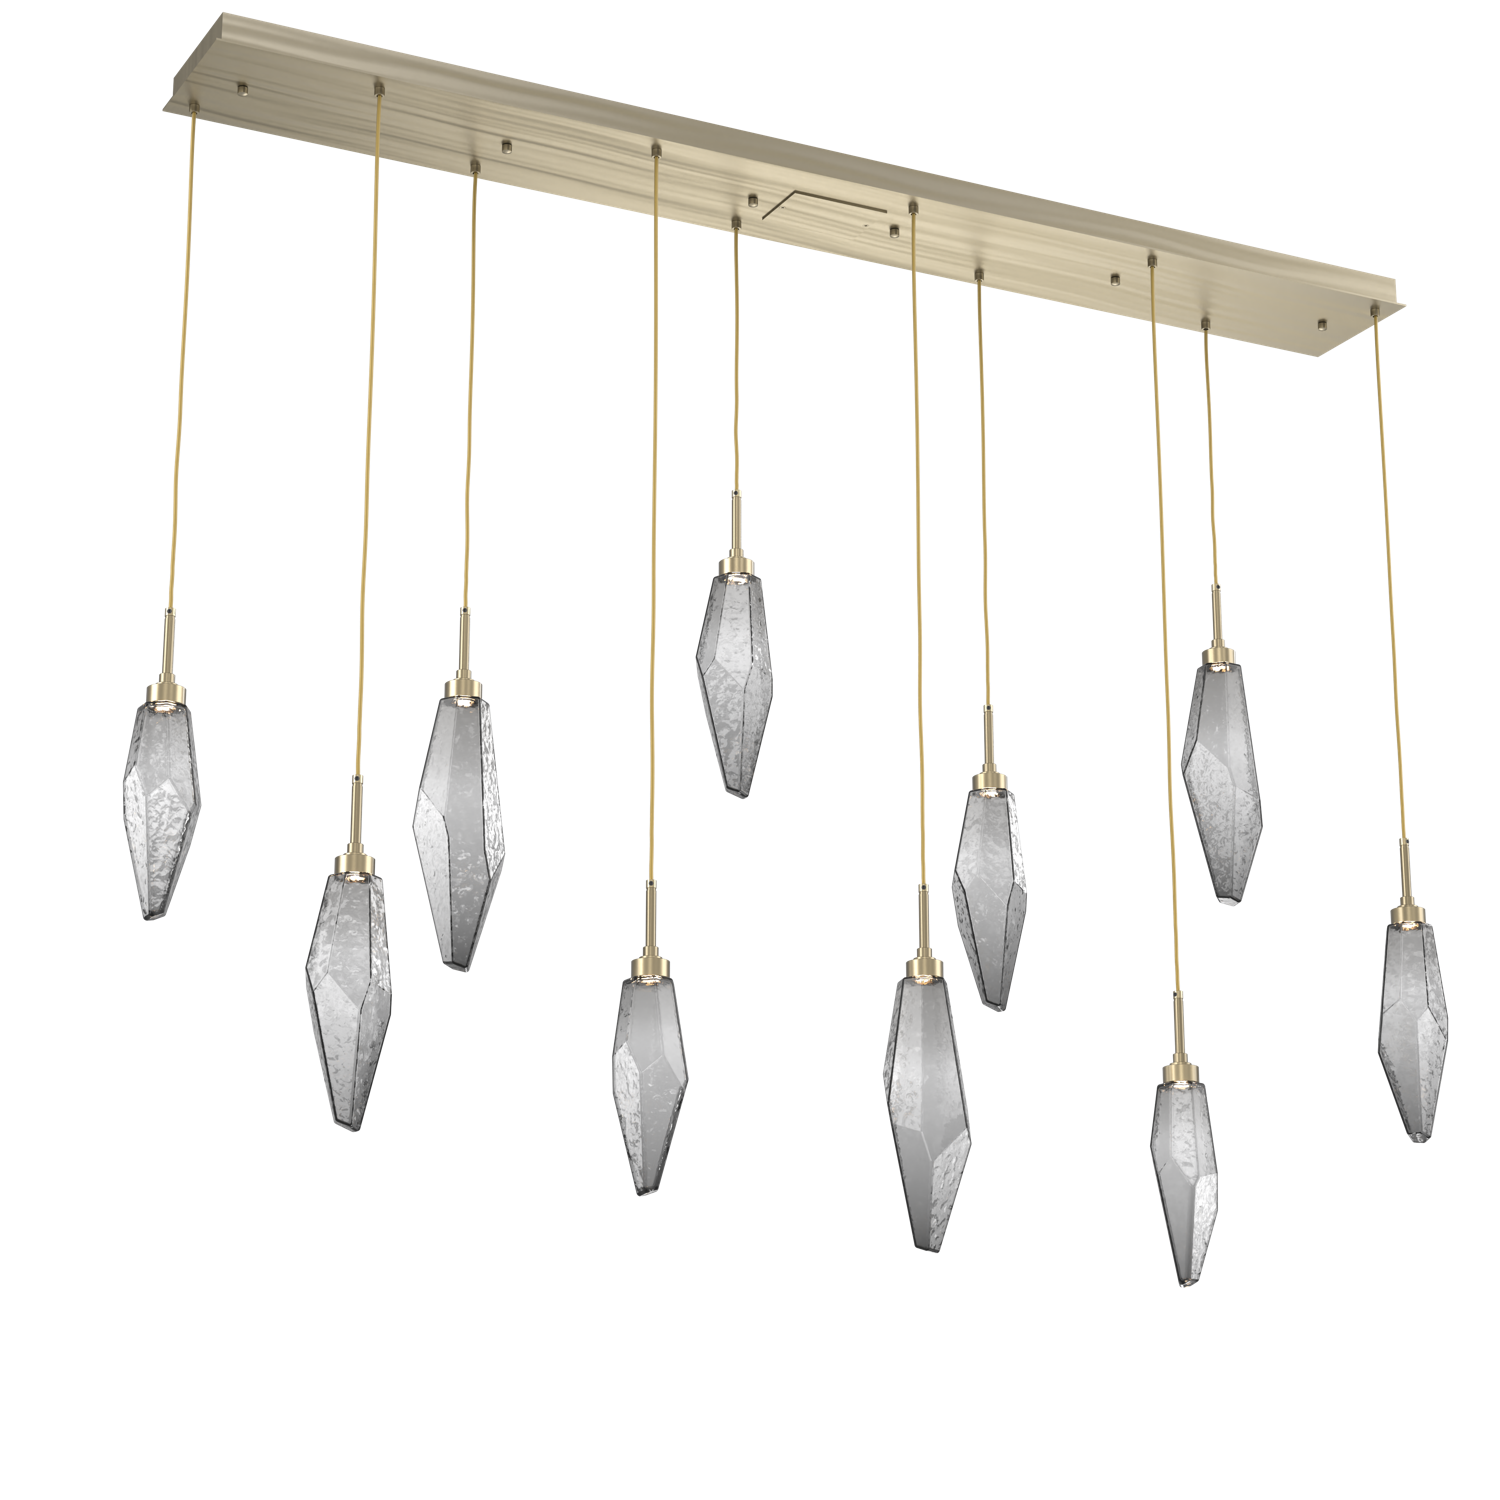 PLB0050-10-HB-CS-Hammerton-Studio-Rock-Crystal-10-light-linear-pendant-chandelier-with-heritage-brass-finish-and-chilled-smoke-glass-shades-and-LED-lamping